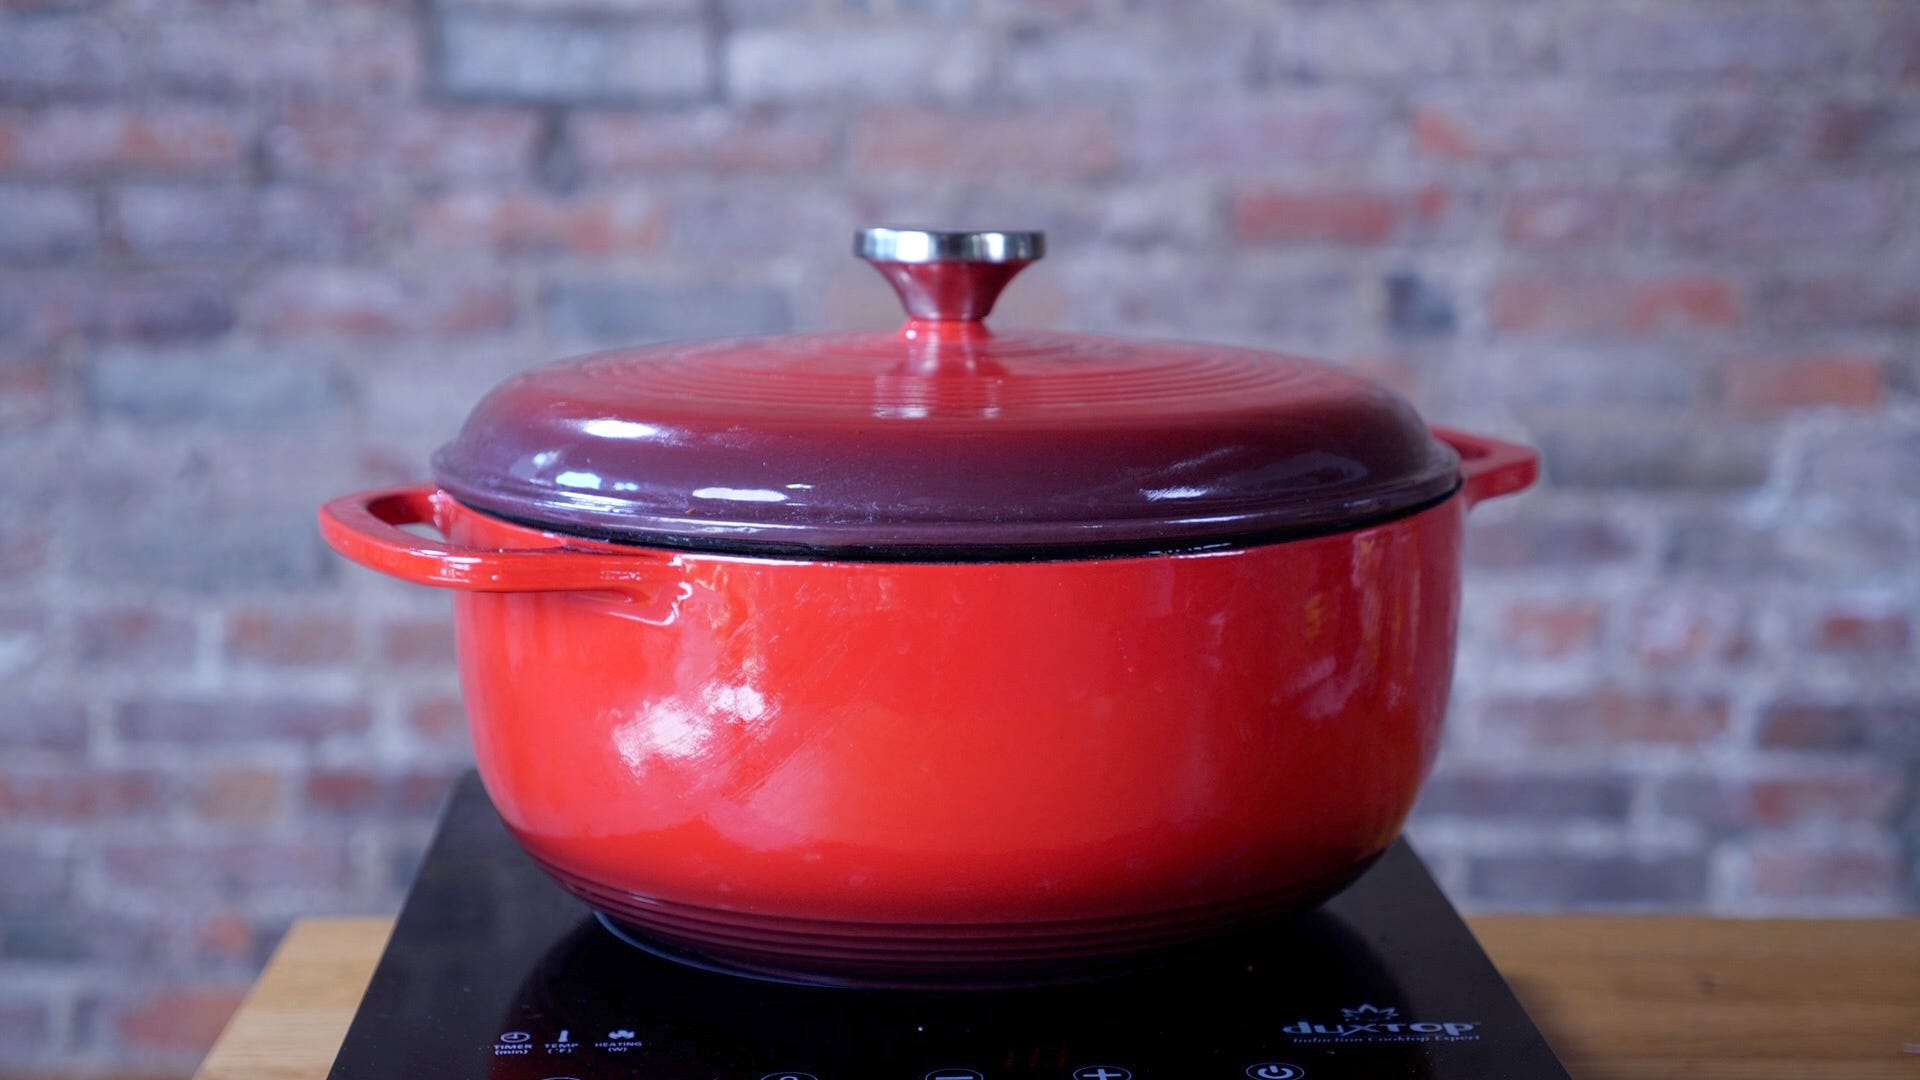 I Cleaned My Best Friend's Impossibly Gross Dutch Oven with Oven Cleaner —  Here's What Happened